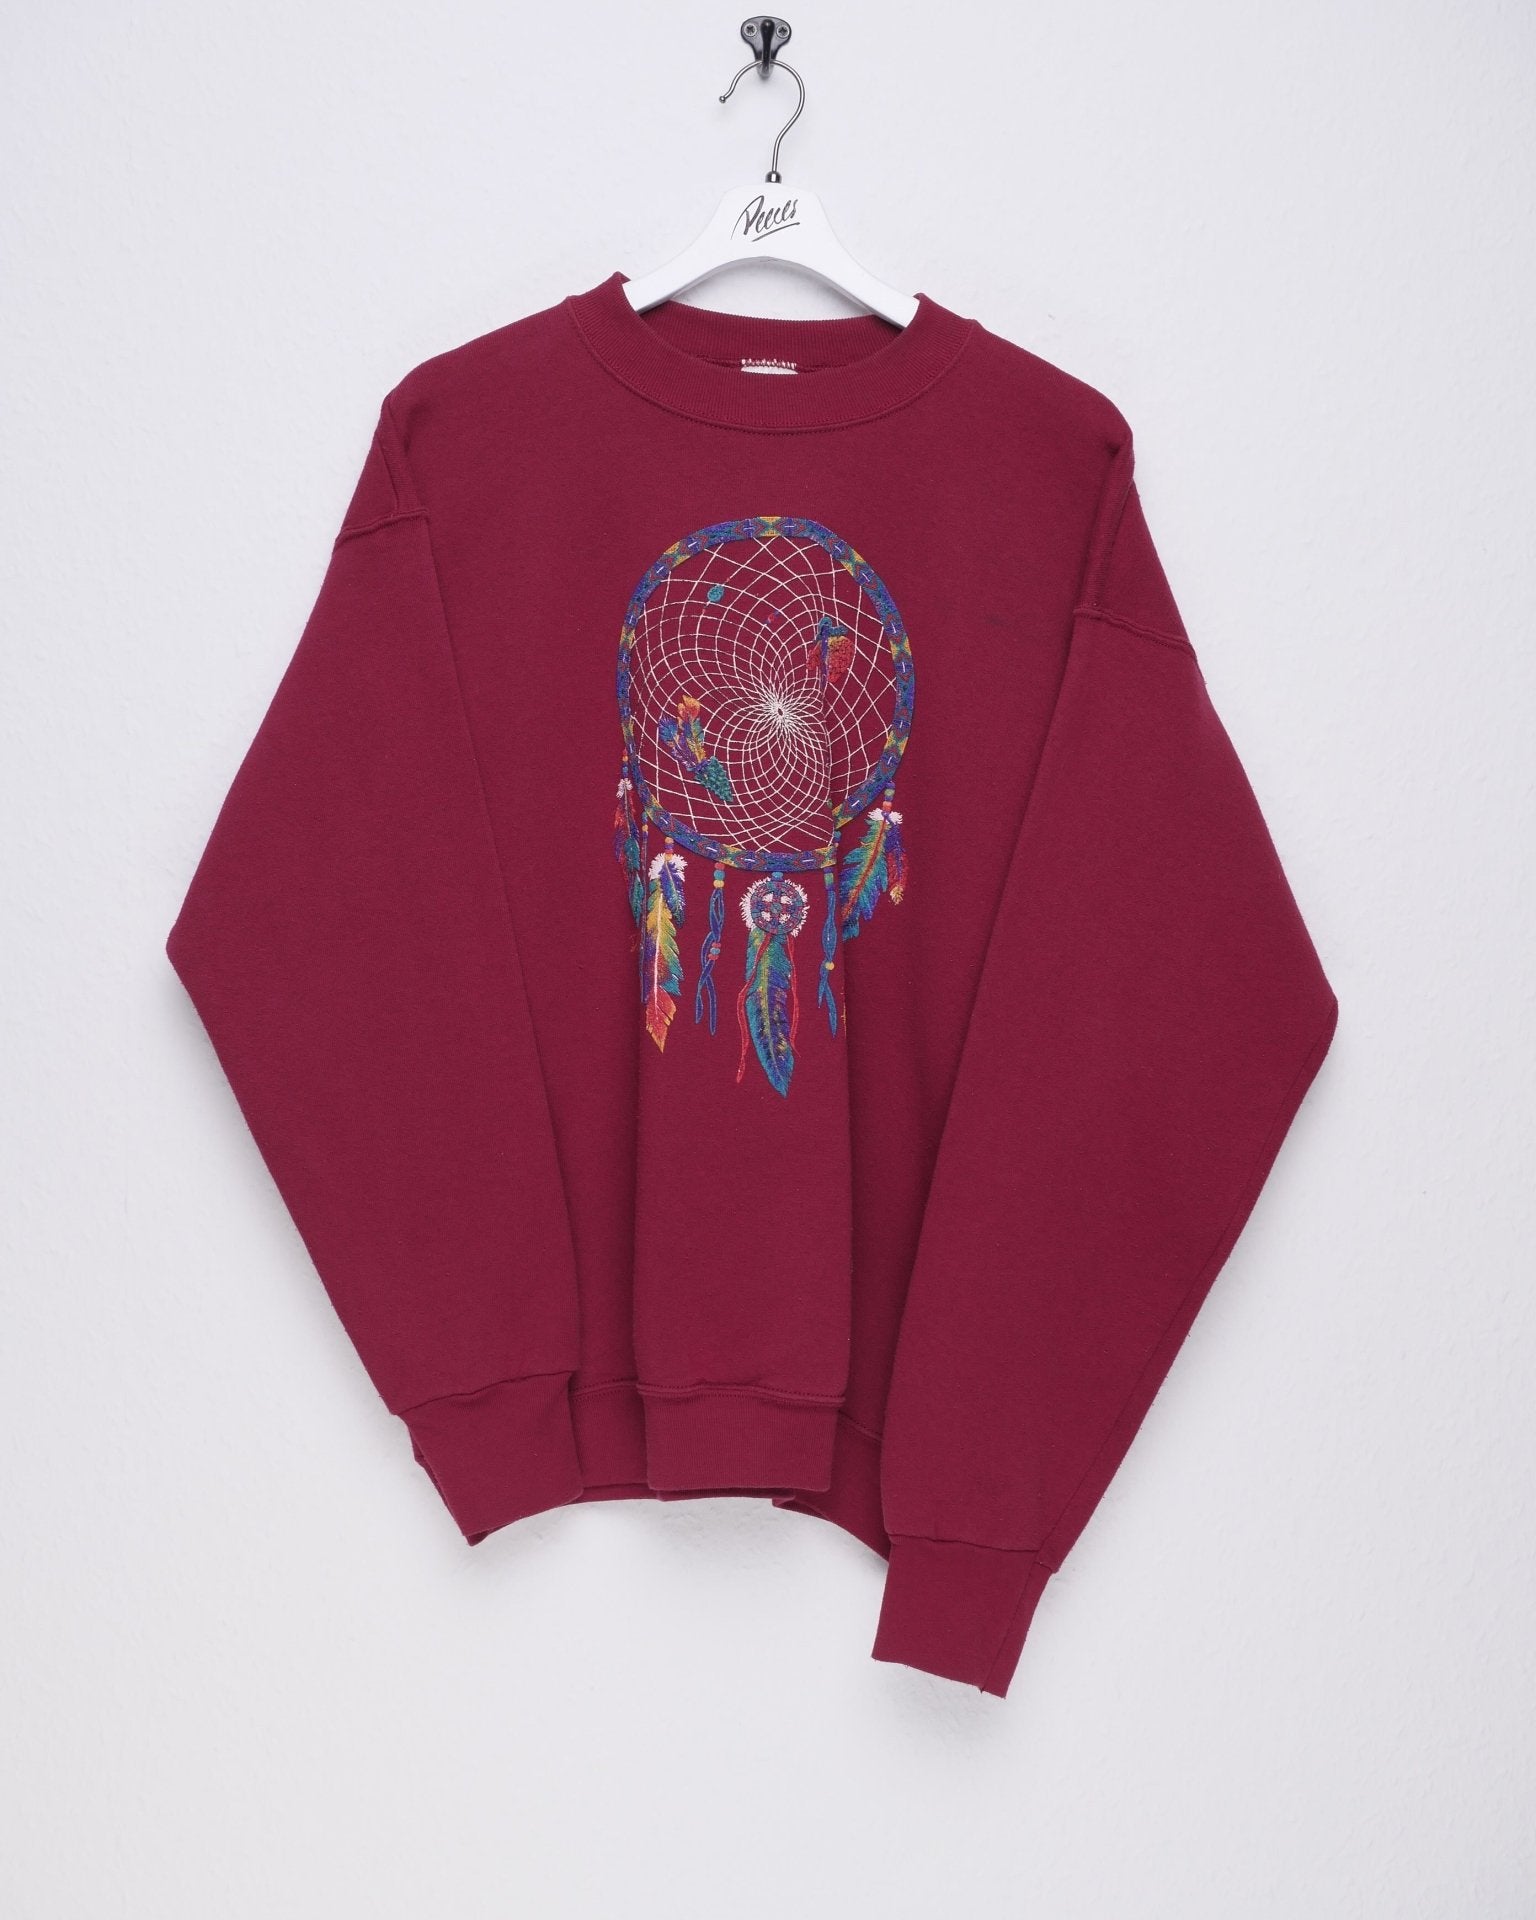 fruit 'Dreamcatcher' printed Graphic red Sweater - Peeces